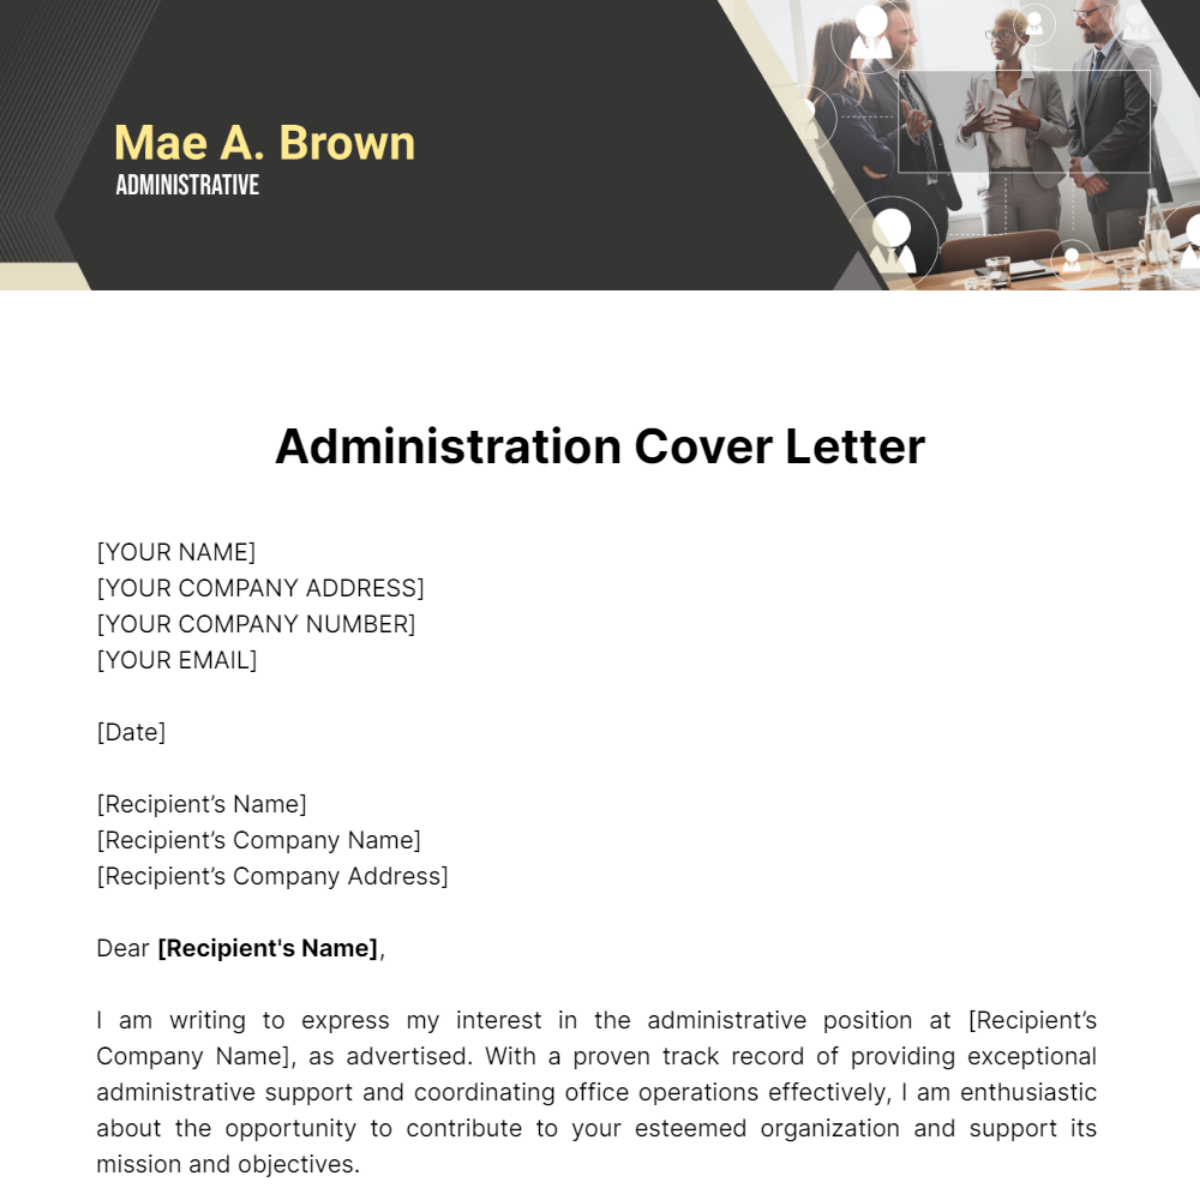 Administration Cover Letter Template